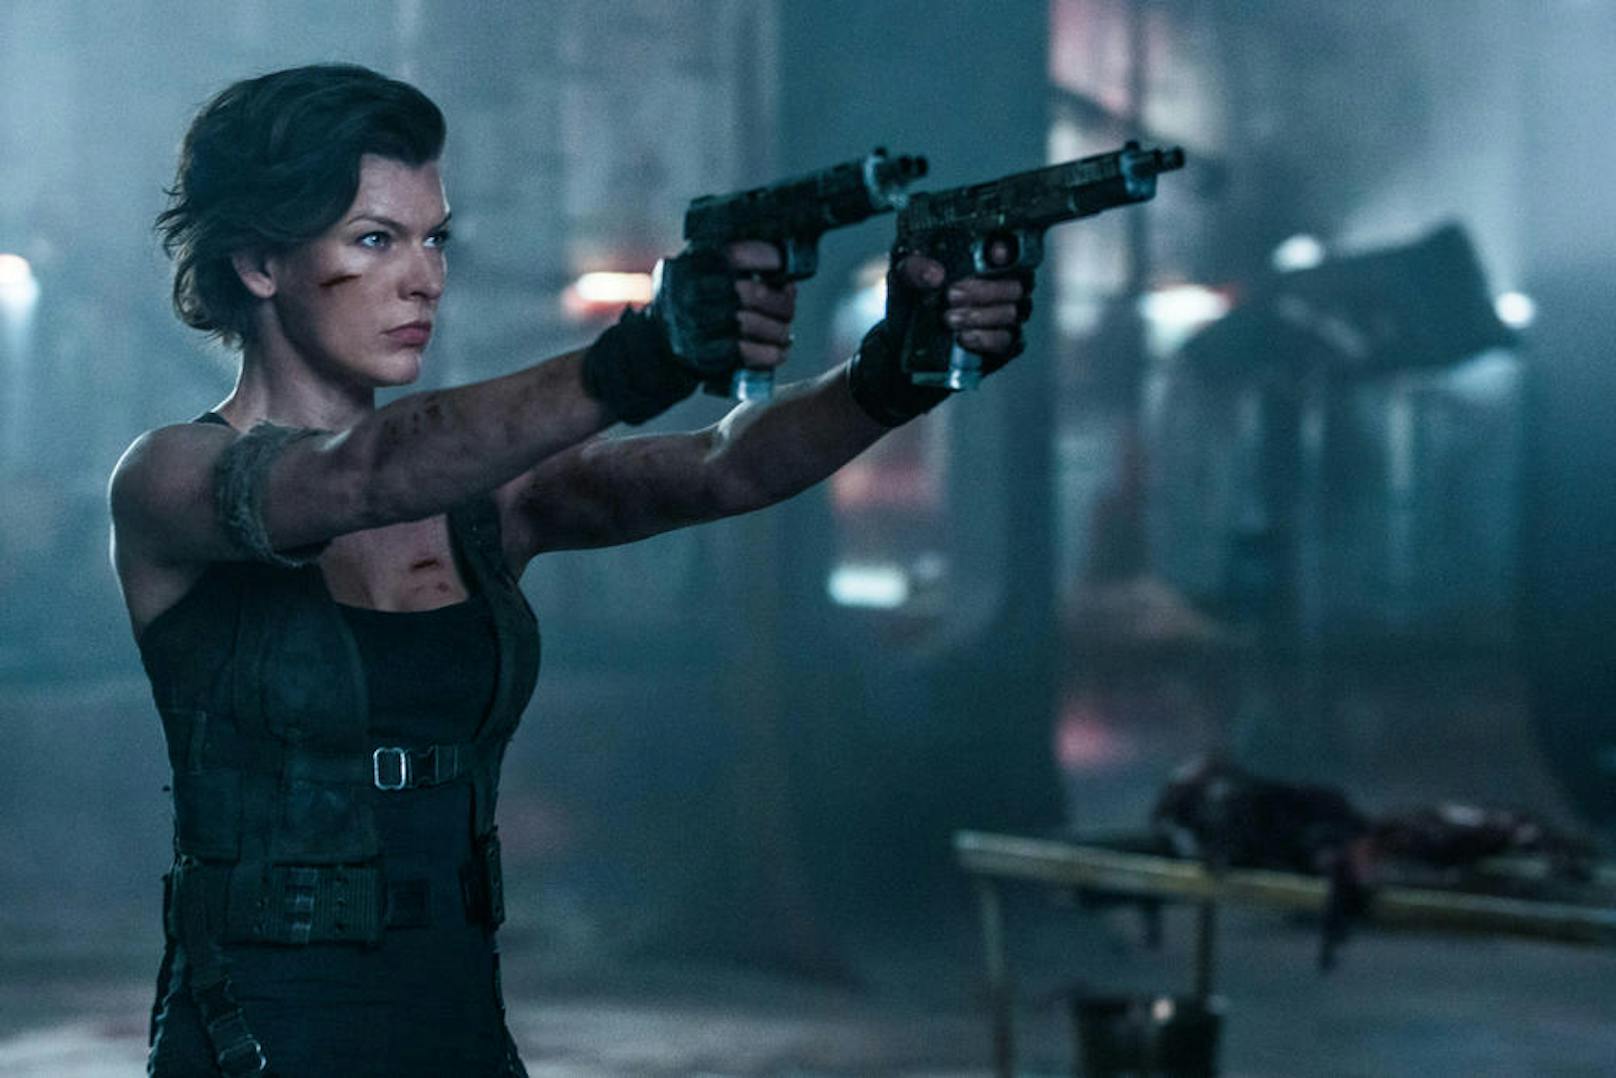 Milla Jovovich in "Resident Evil - The Final Chapter"